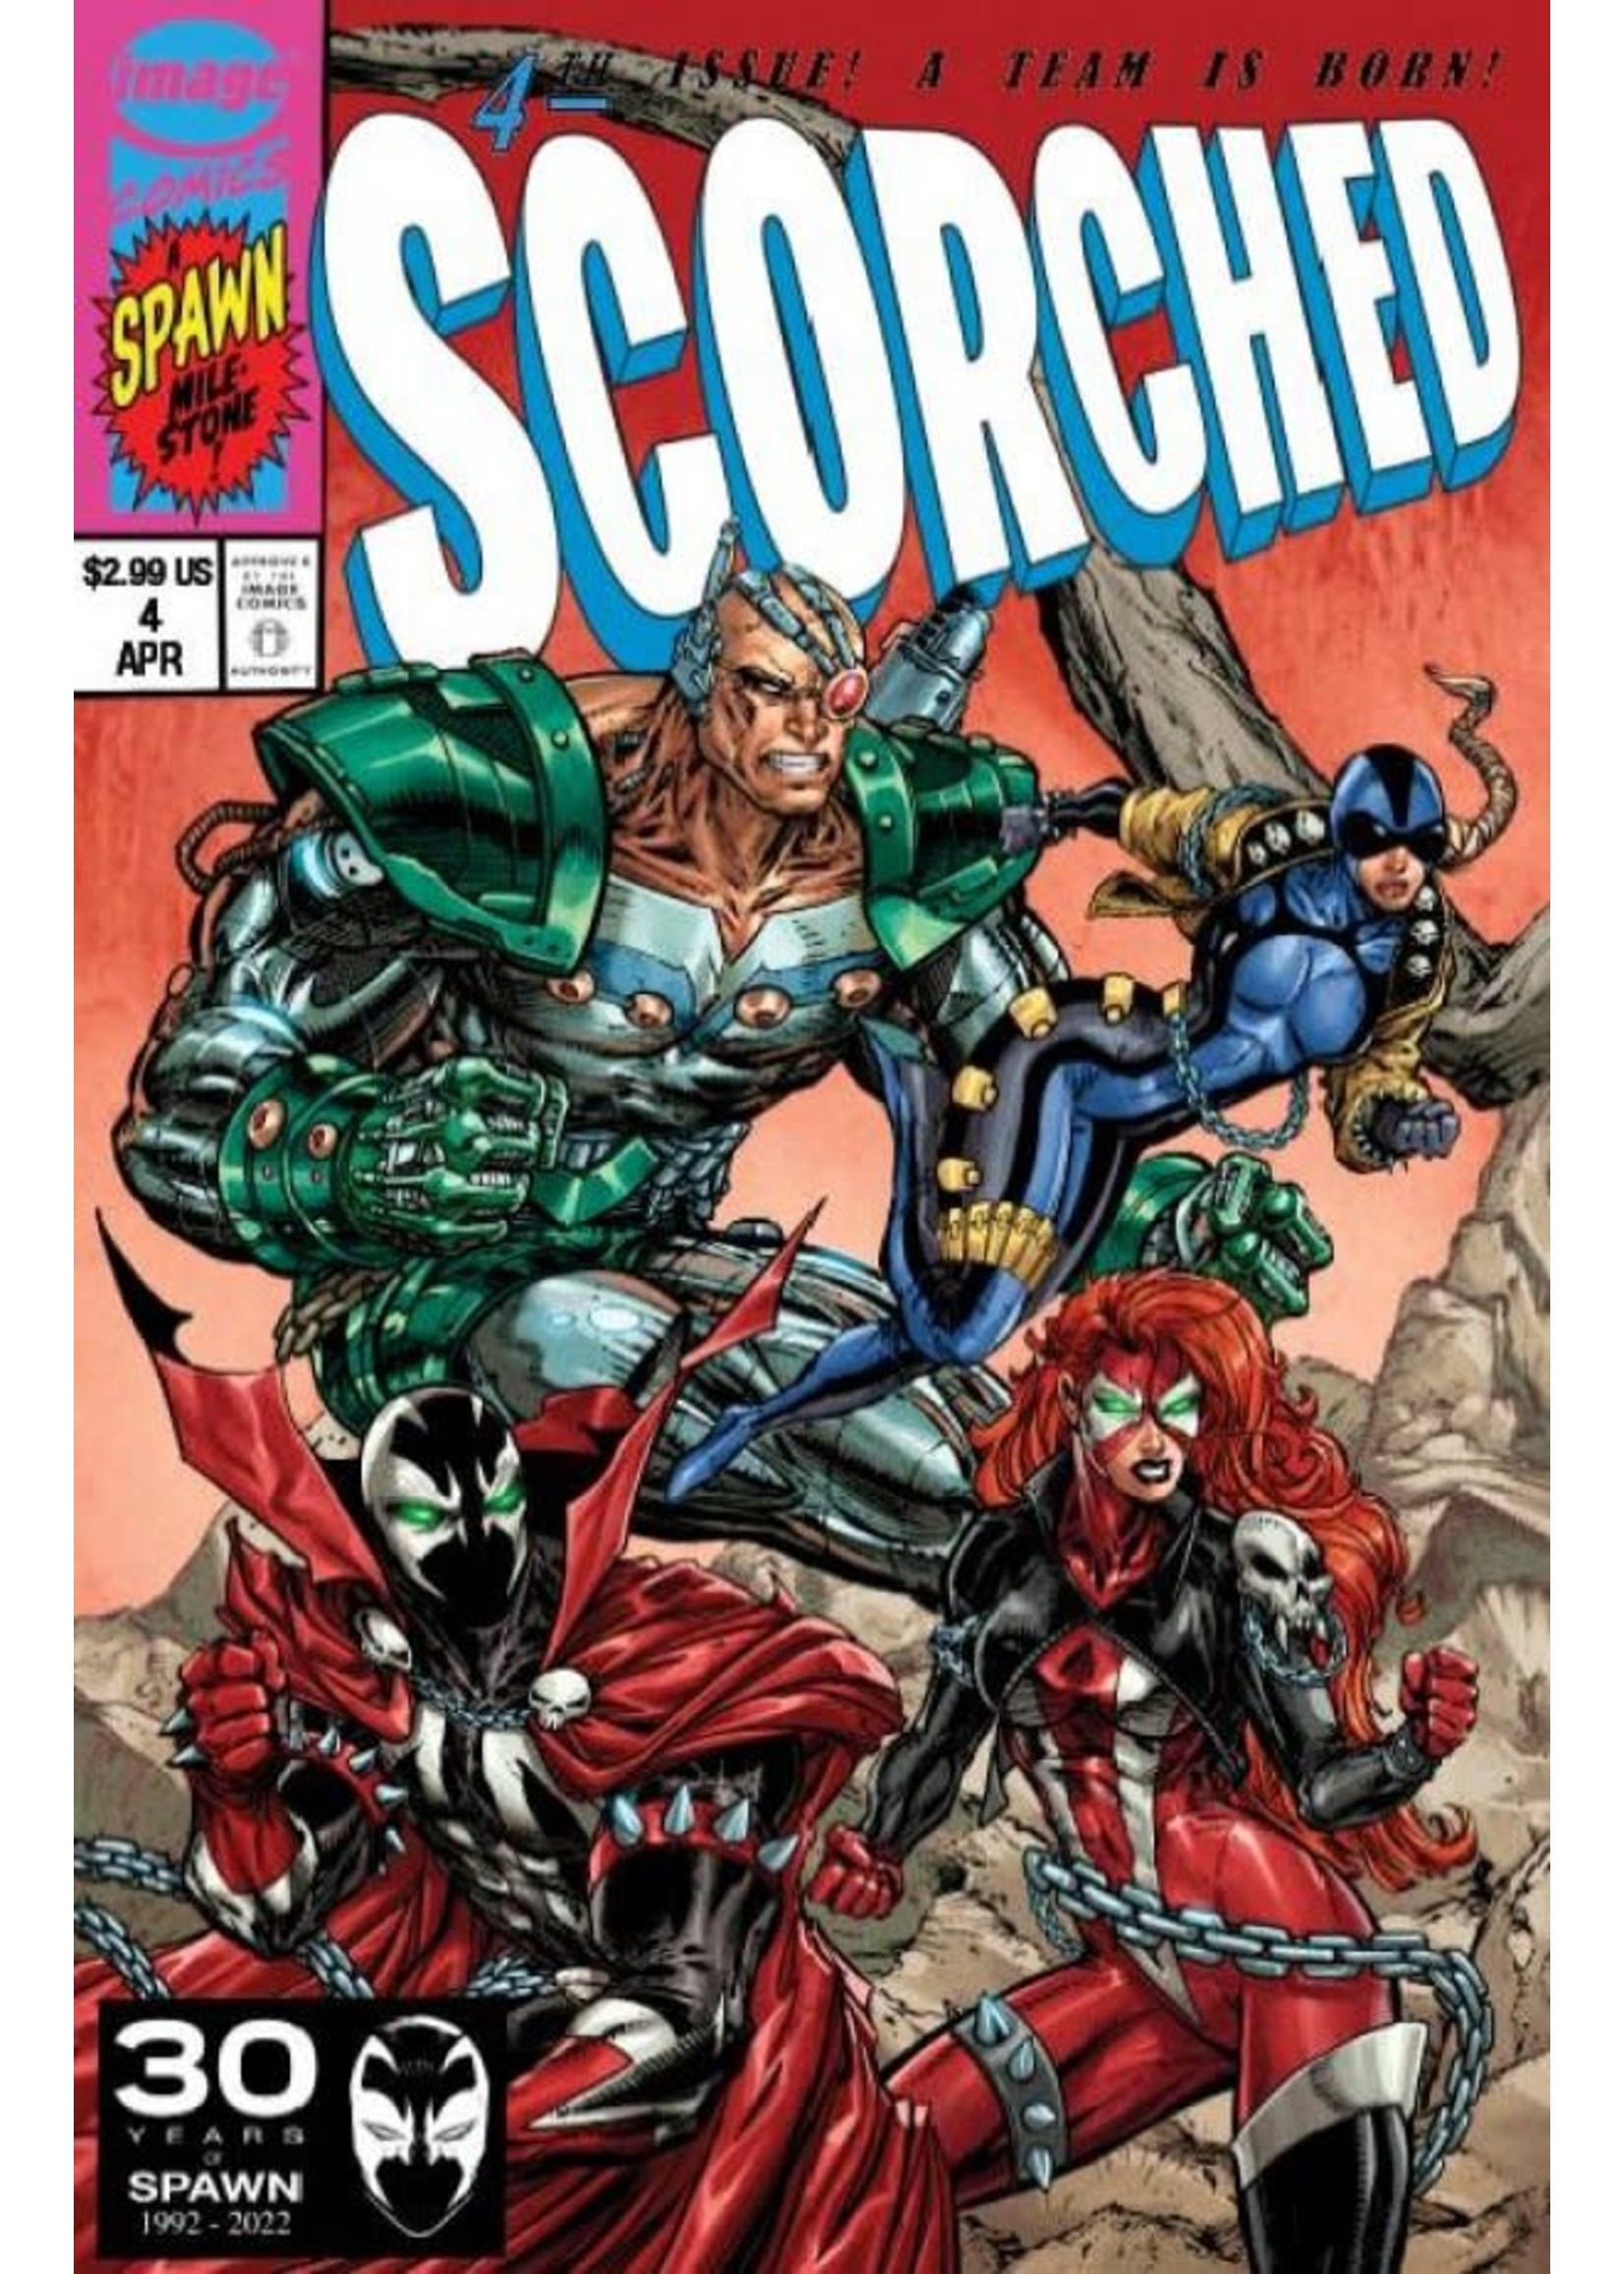 Spawn The Scorched #4